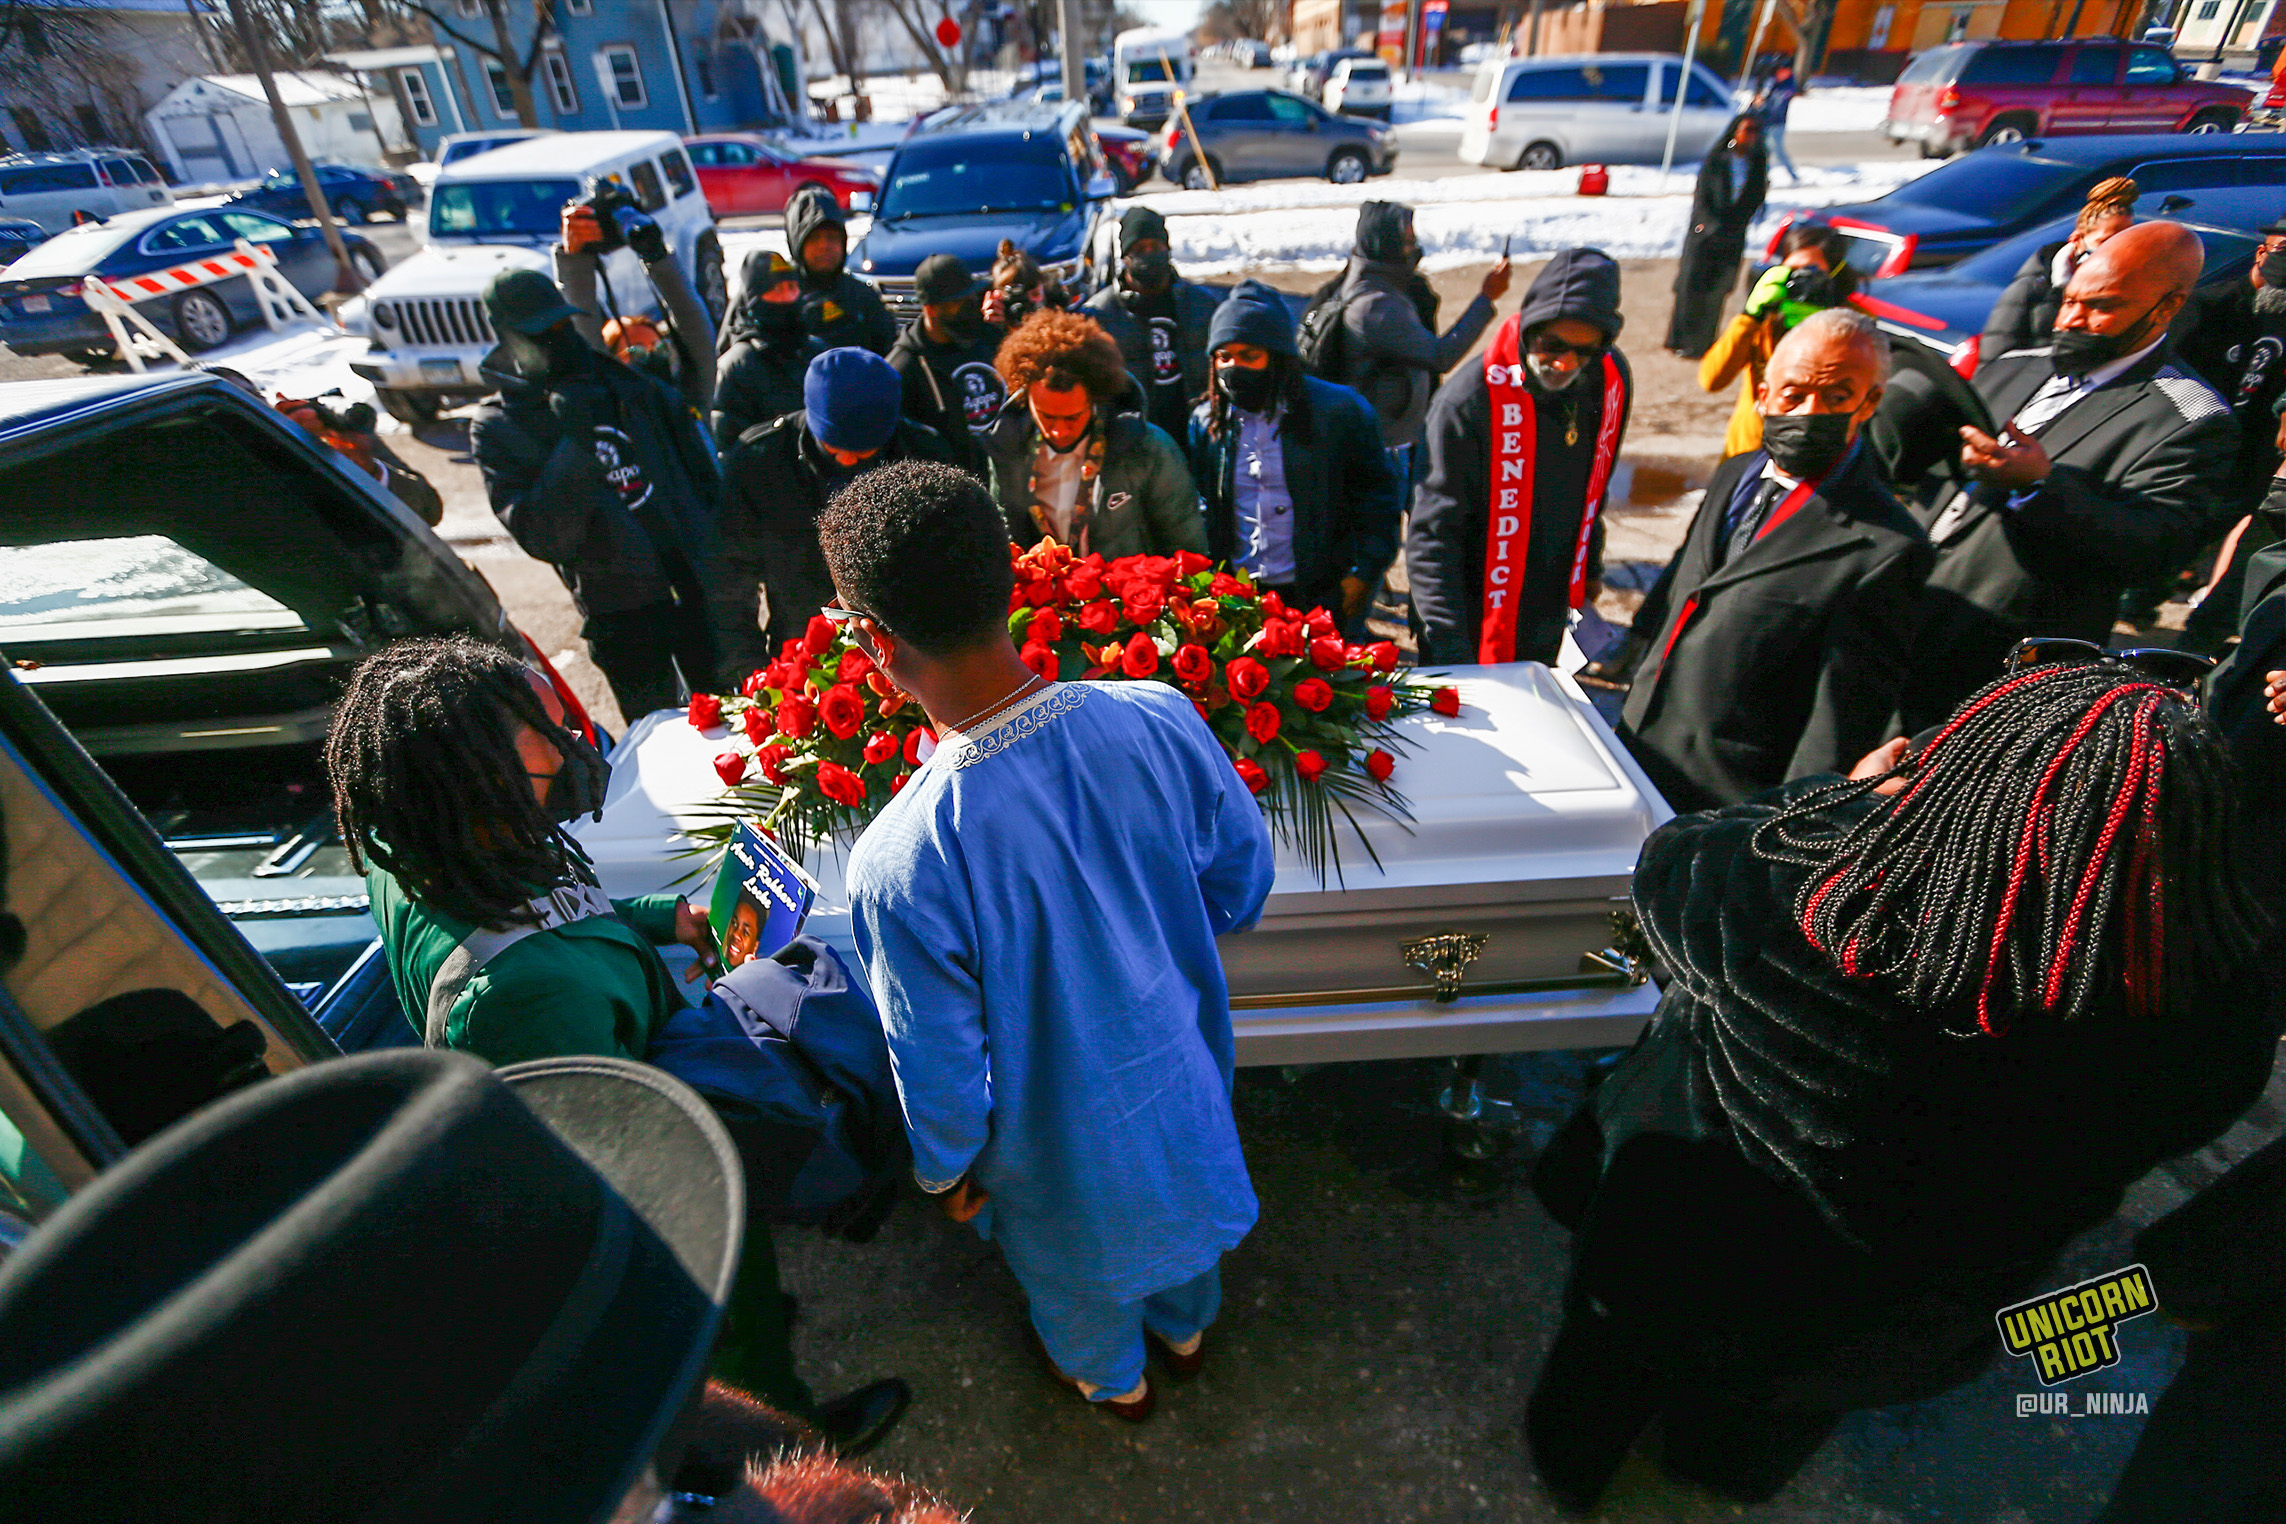 February 17, 2022, Minneapolis, MN: The casket containing Amir Locke is loaded into the hearse outside of Shiloh Temple.